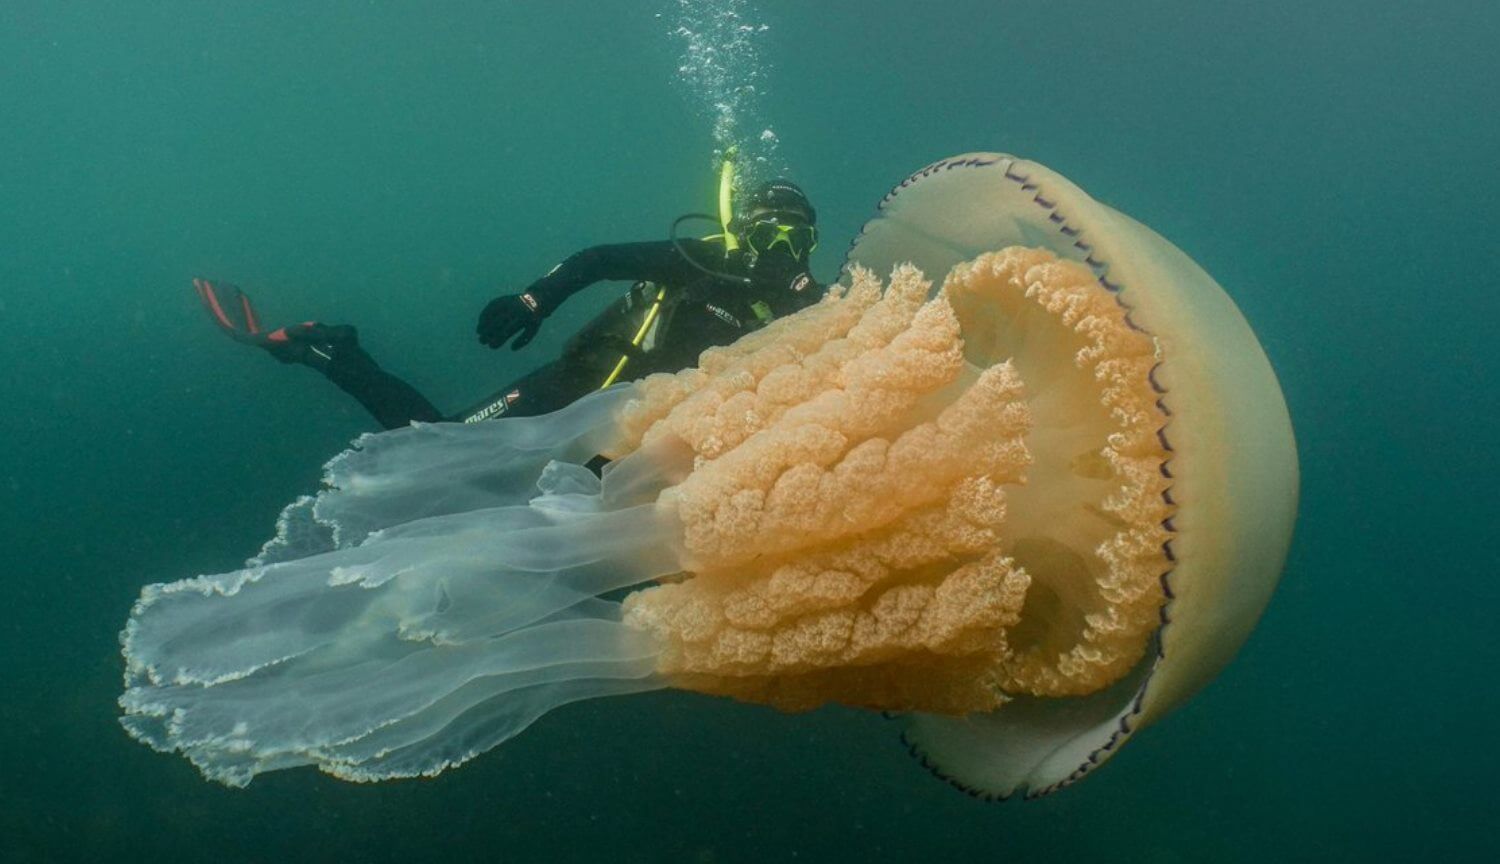 #video | In the UK found the giant jellyfish the size of a man